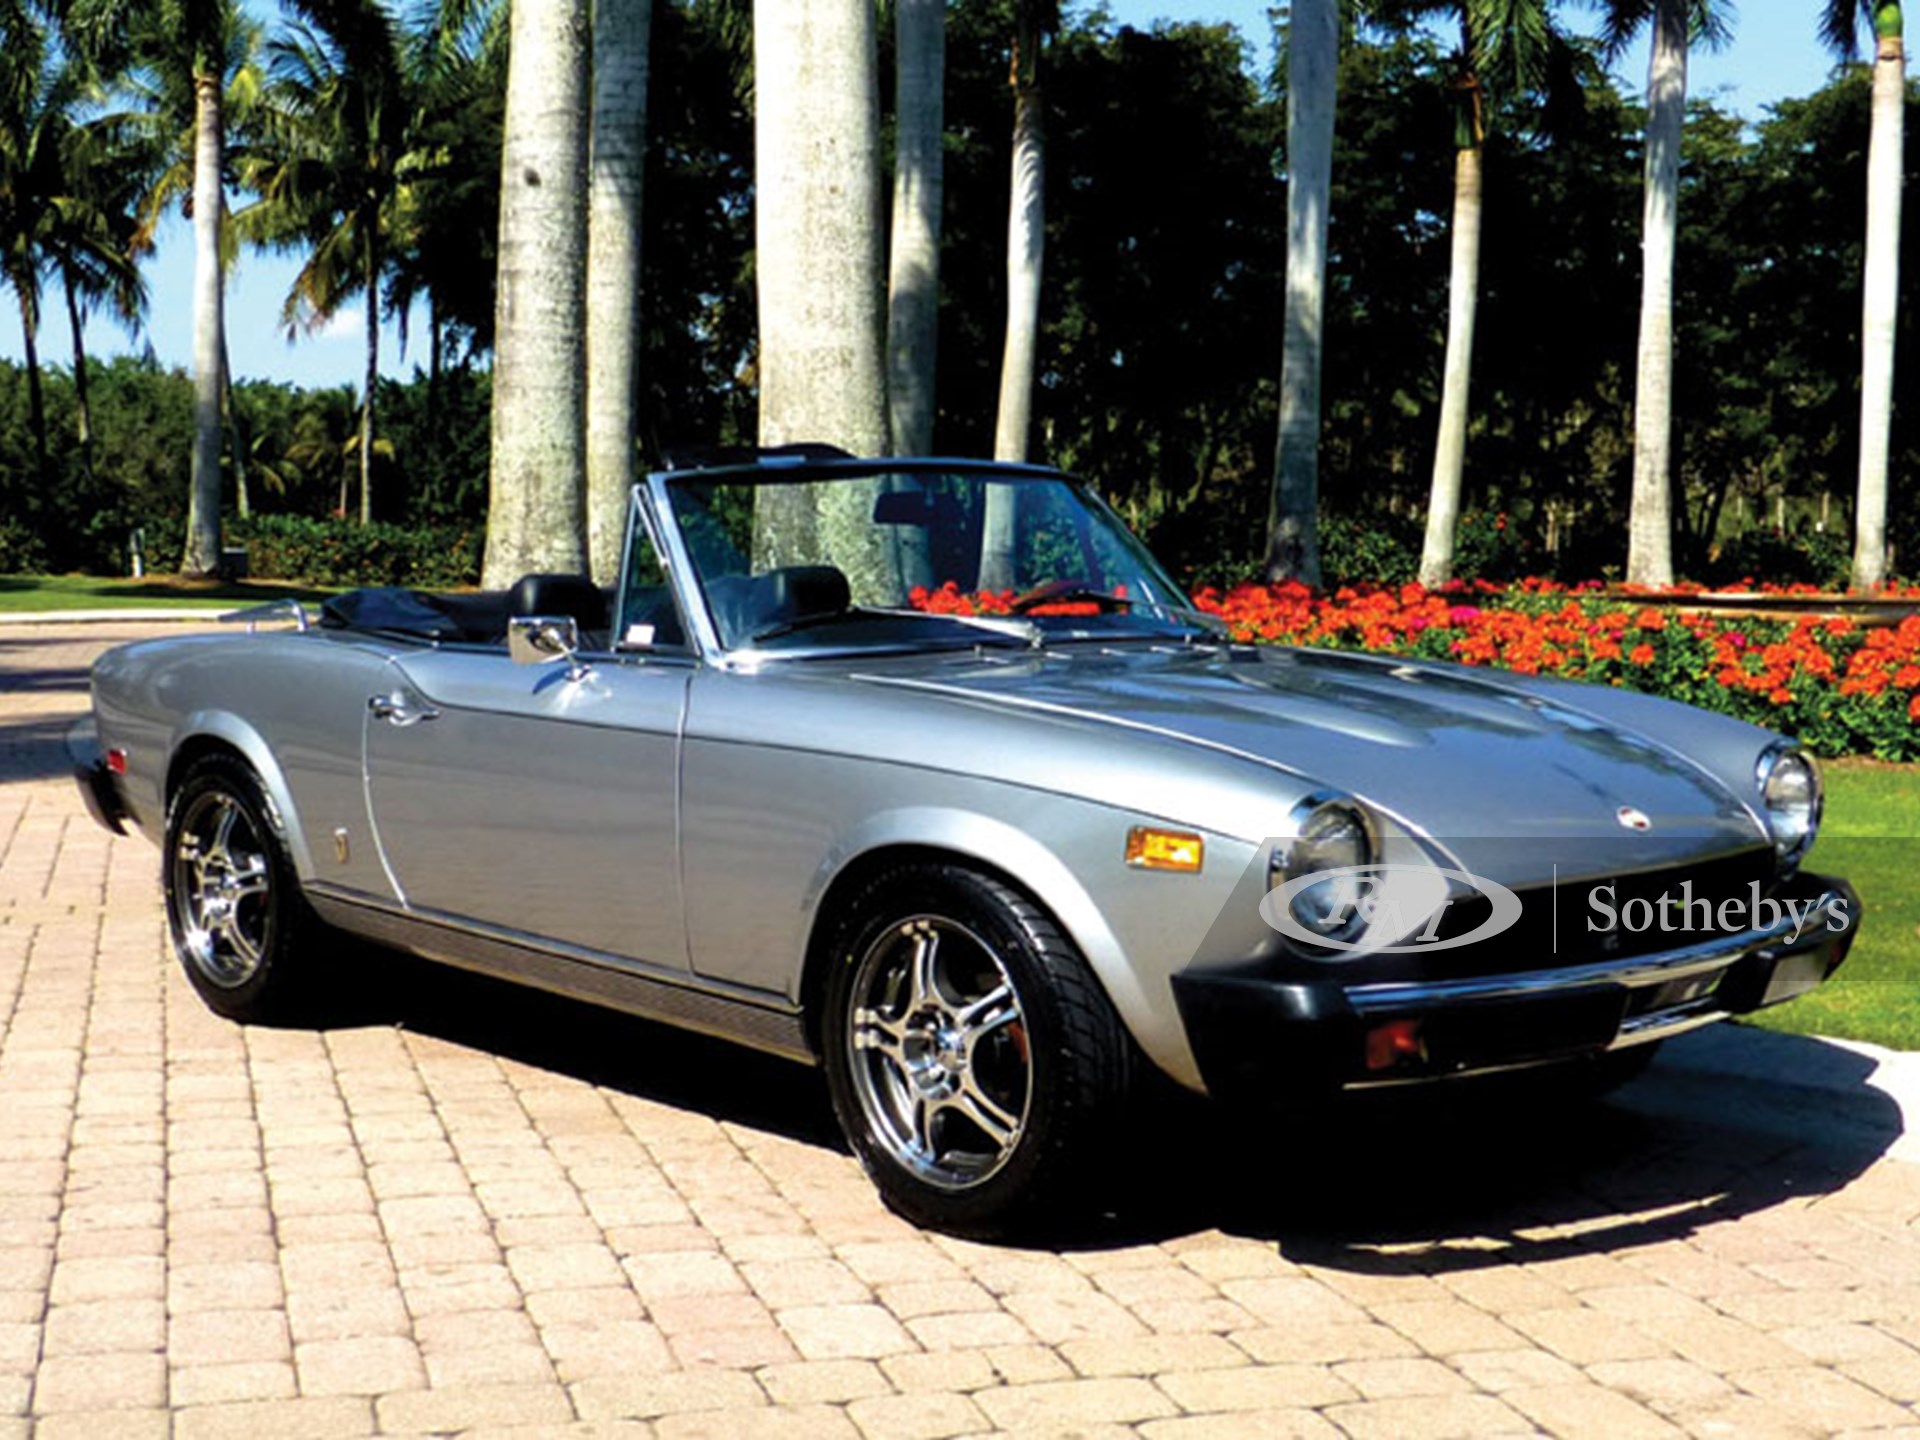 1978 Fiat 124 Spider Fort Lauderdale 2014 RM Auctions